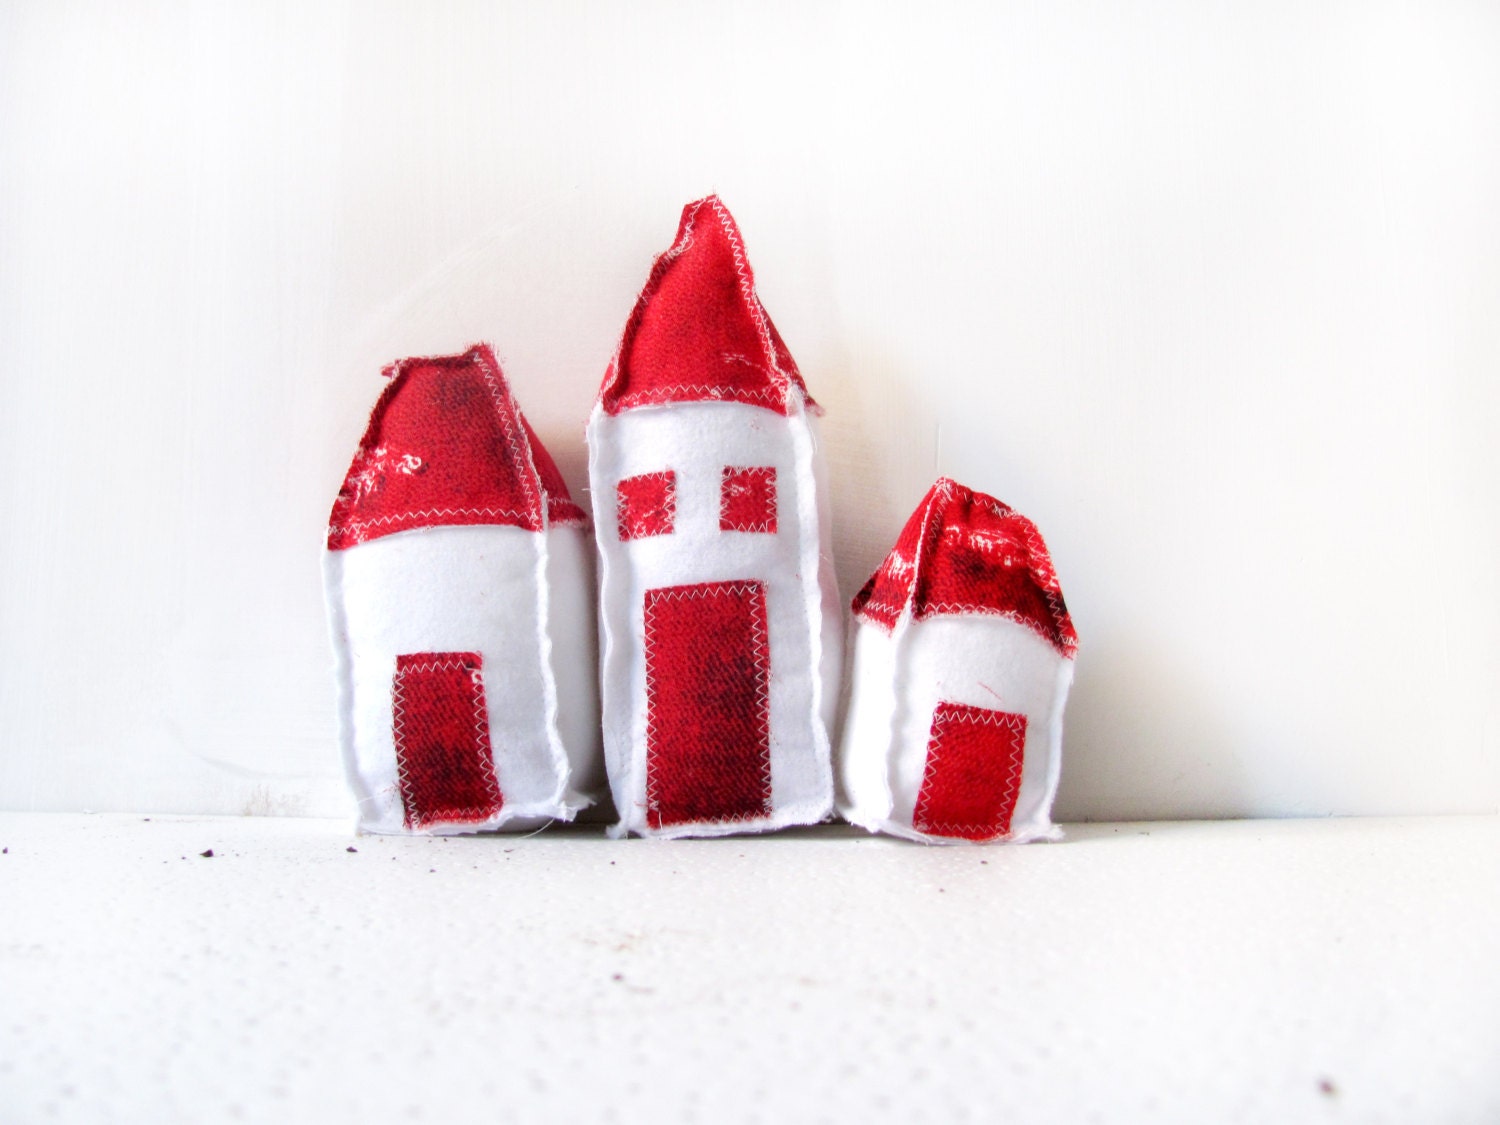 home decor,handmade houses,red and white, valentines day, decoration,small gift, needle felted, handmade houses,valentines day gift, wedding